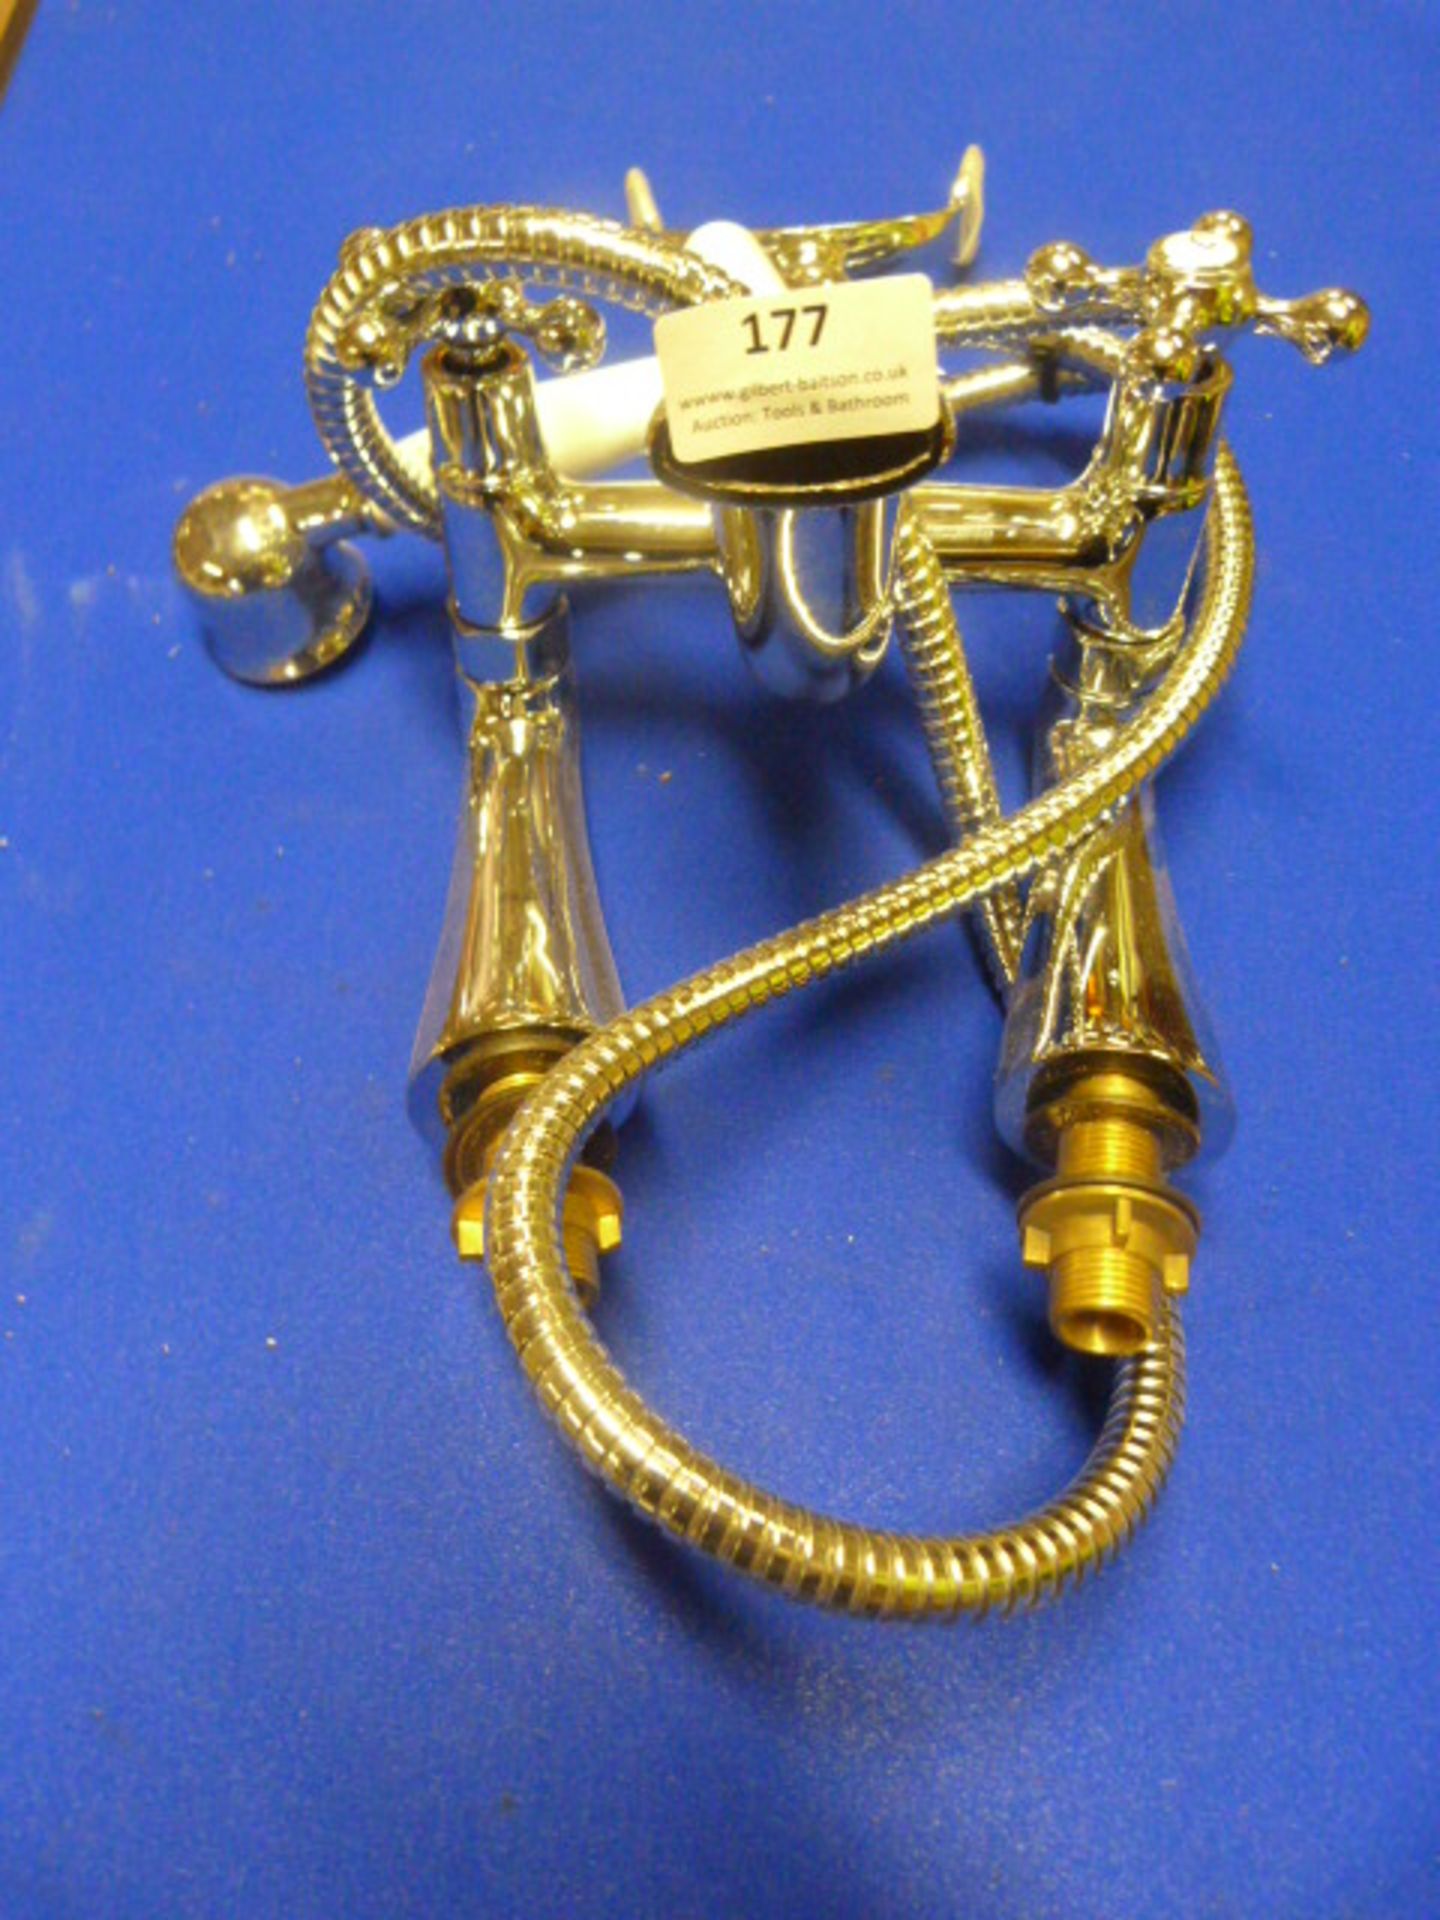 *Victorian Style Mixer Taps with Handheld Shower